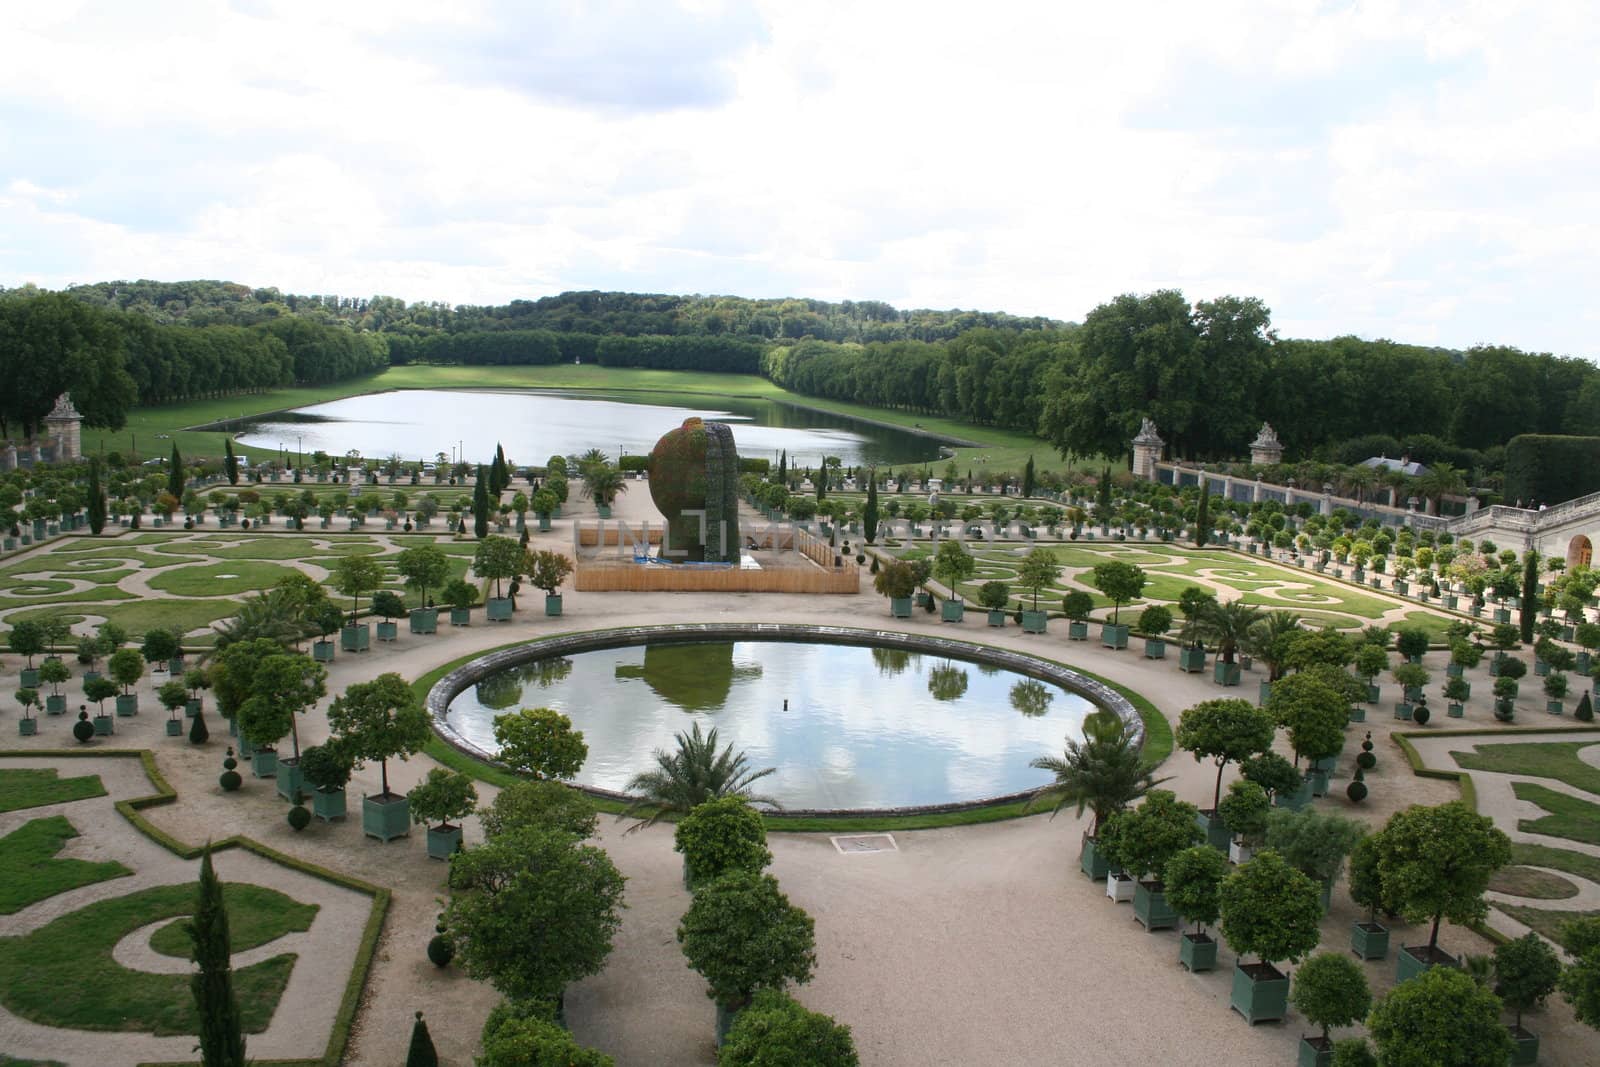 Gardens at Versailles with ponds and lush greenery